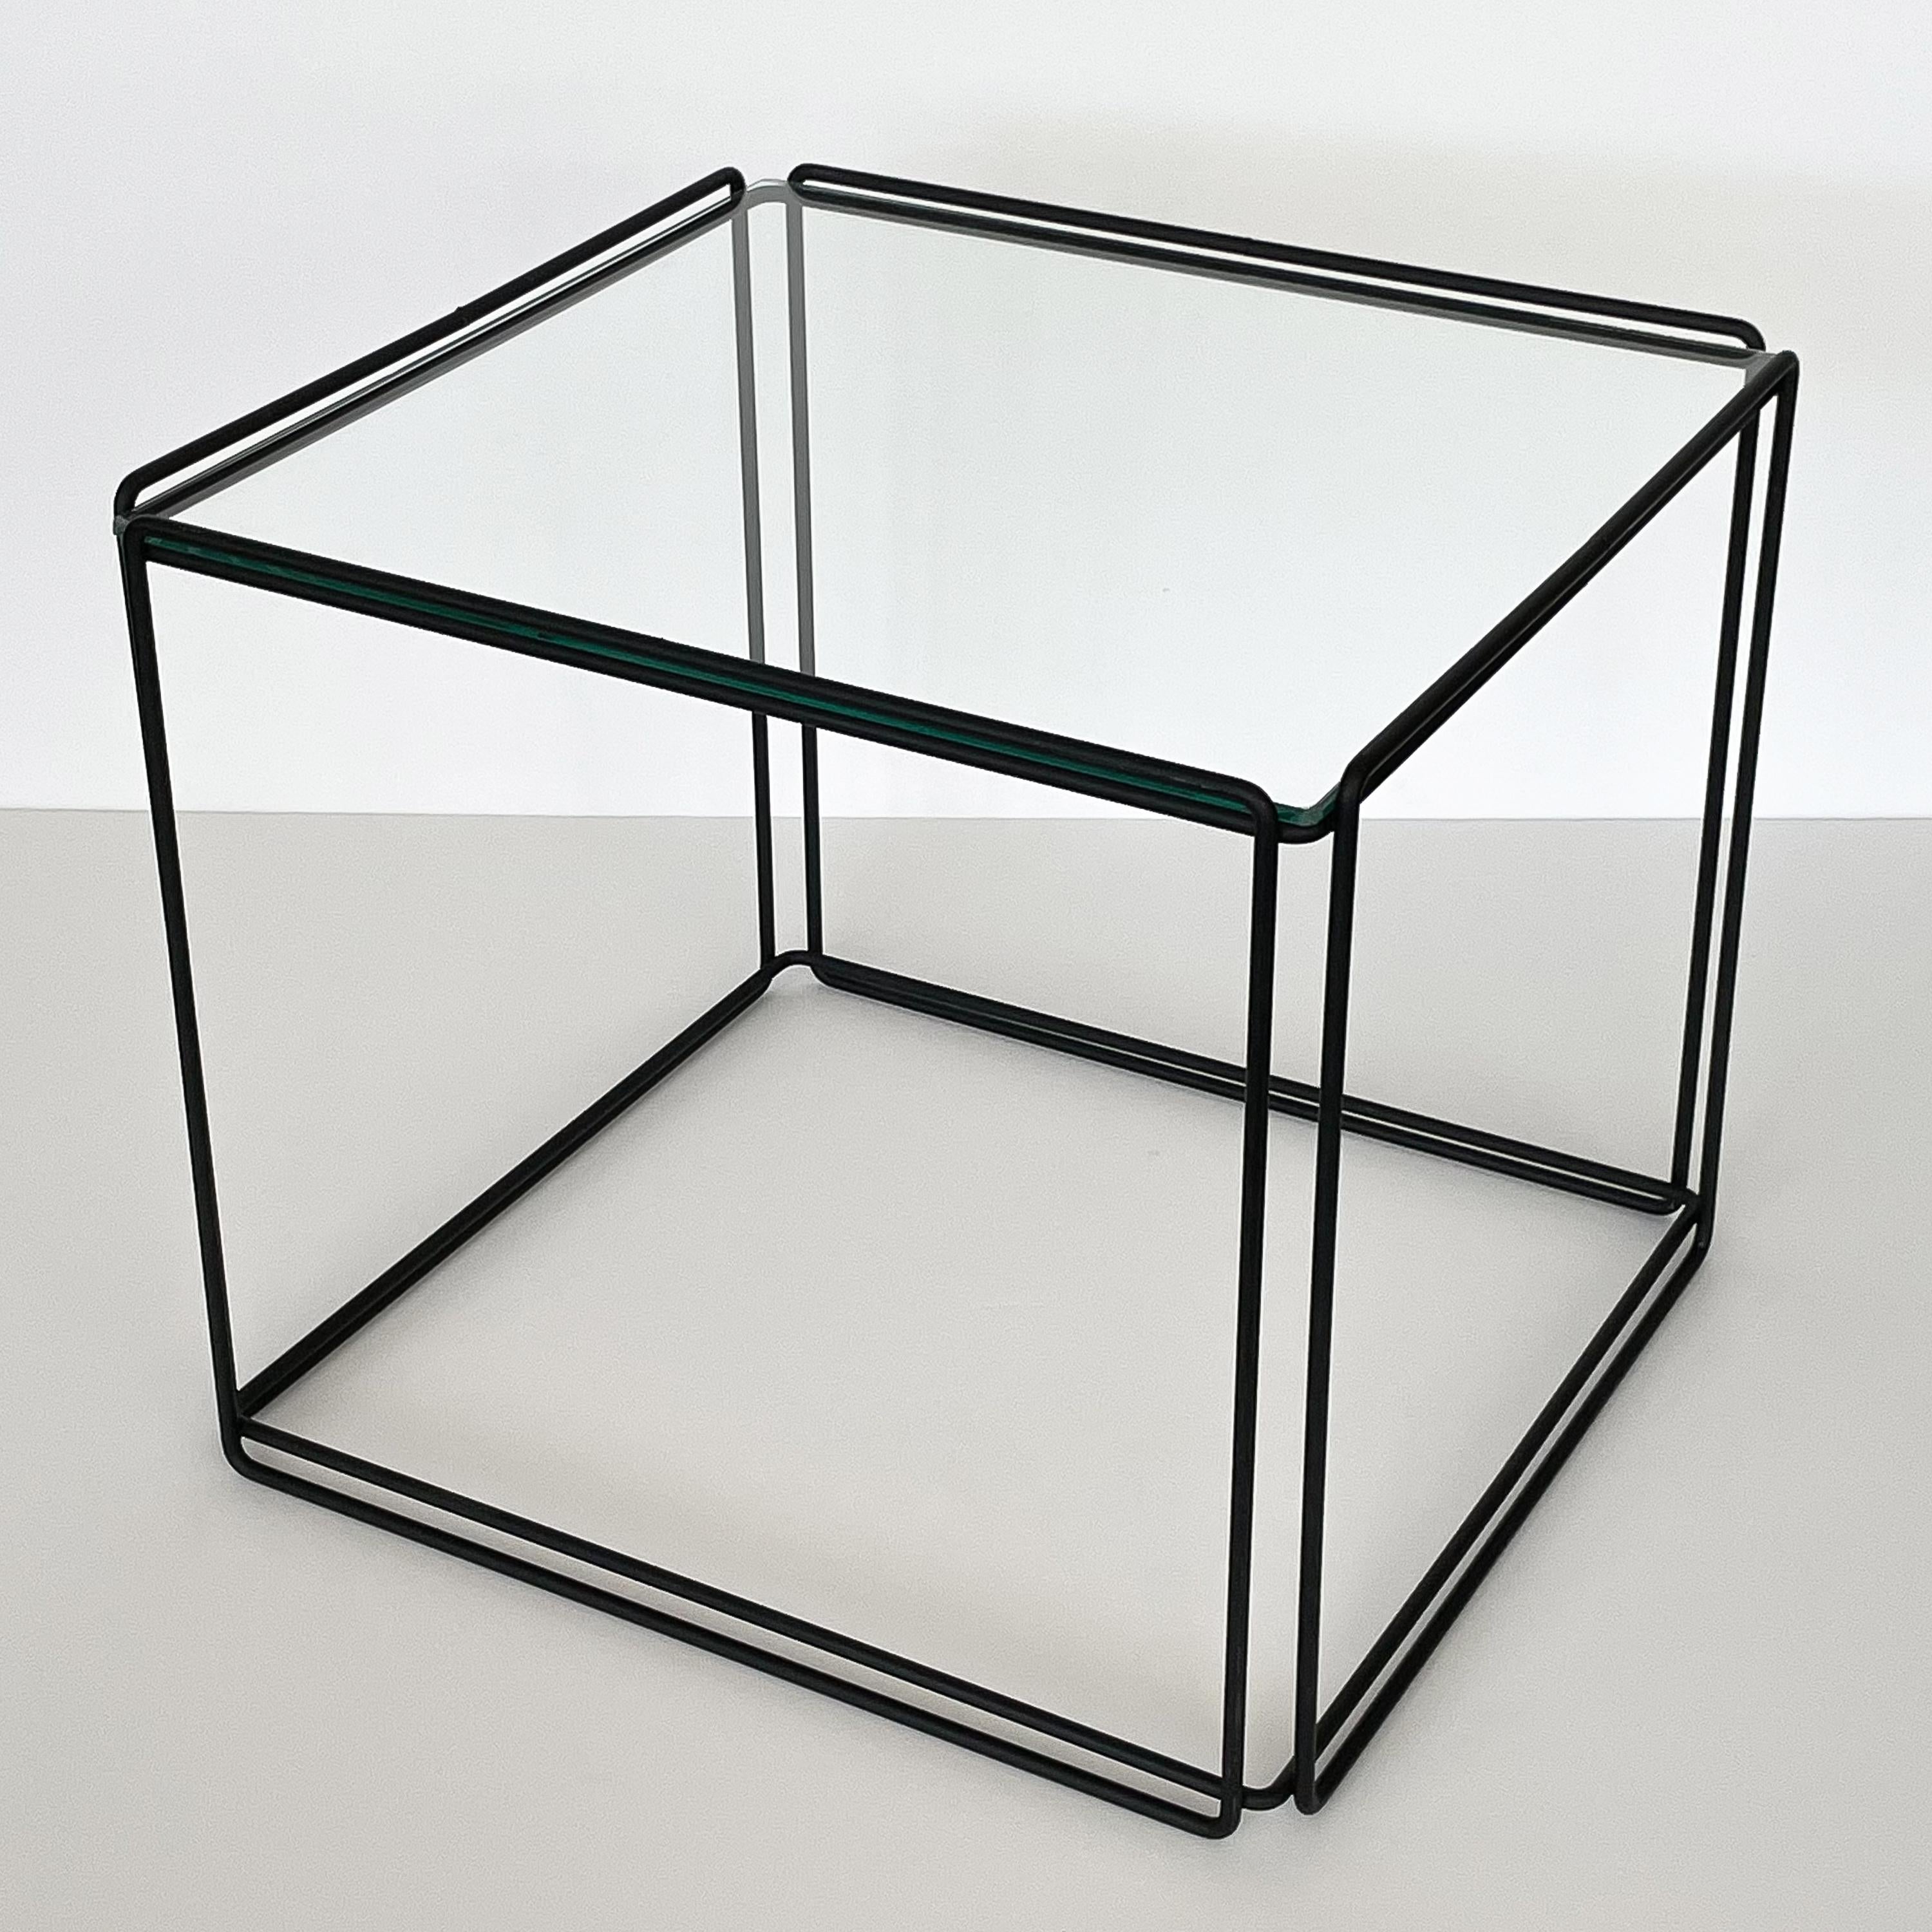 A minimalist metal and glass Isosceles cube side table by Max Sauze for Attrow, France, circa 1970s. Black painted welded wrought iron metal frame with inset 1/4